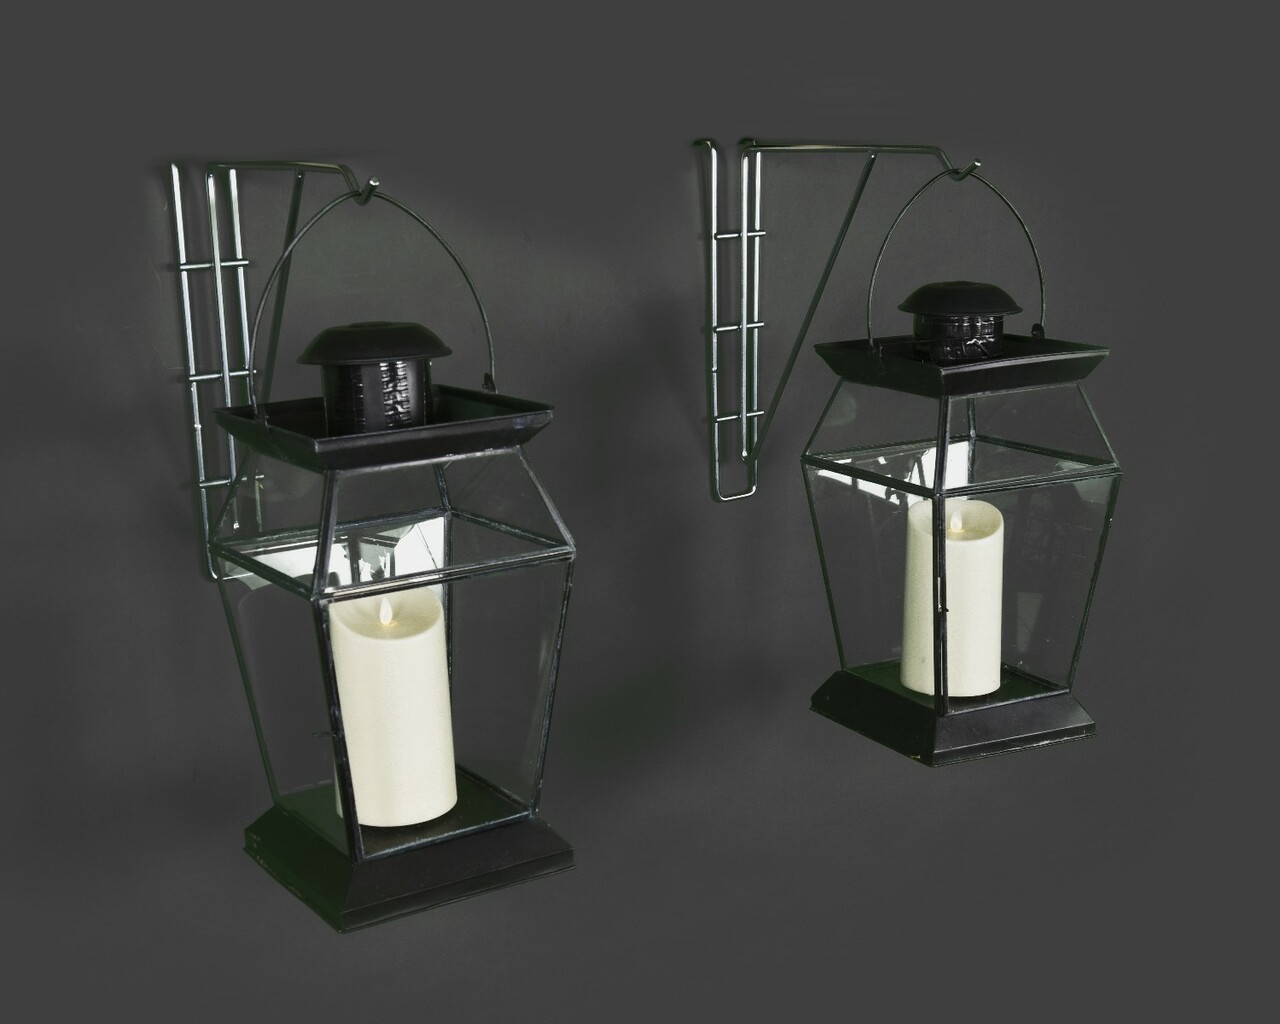 https://equineoasis.com/equine_oasis/wp-content/uploads/royal_wire_claw_extender_with_lanterns.jpg